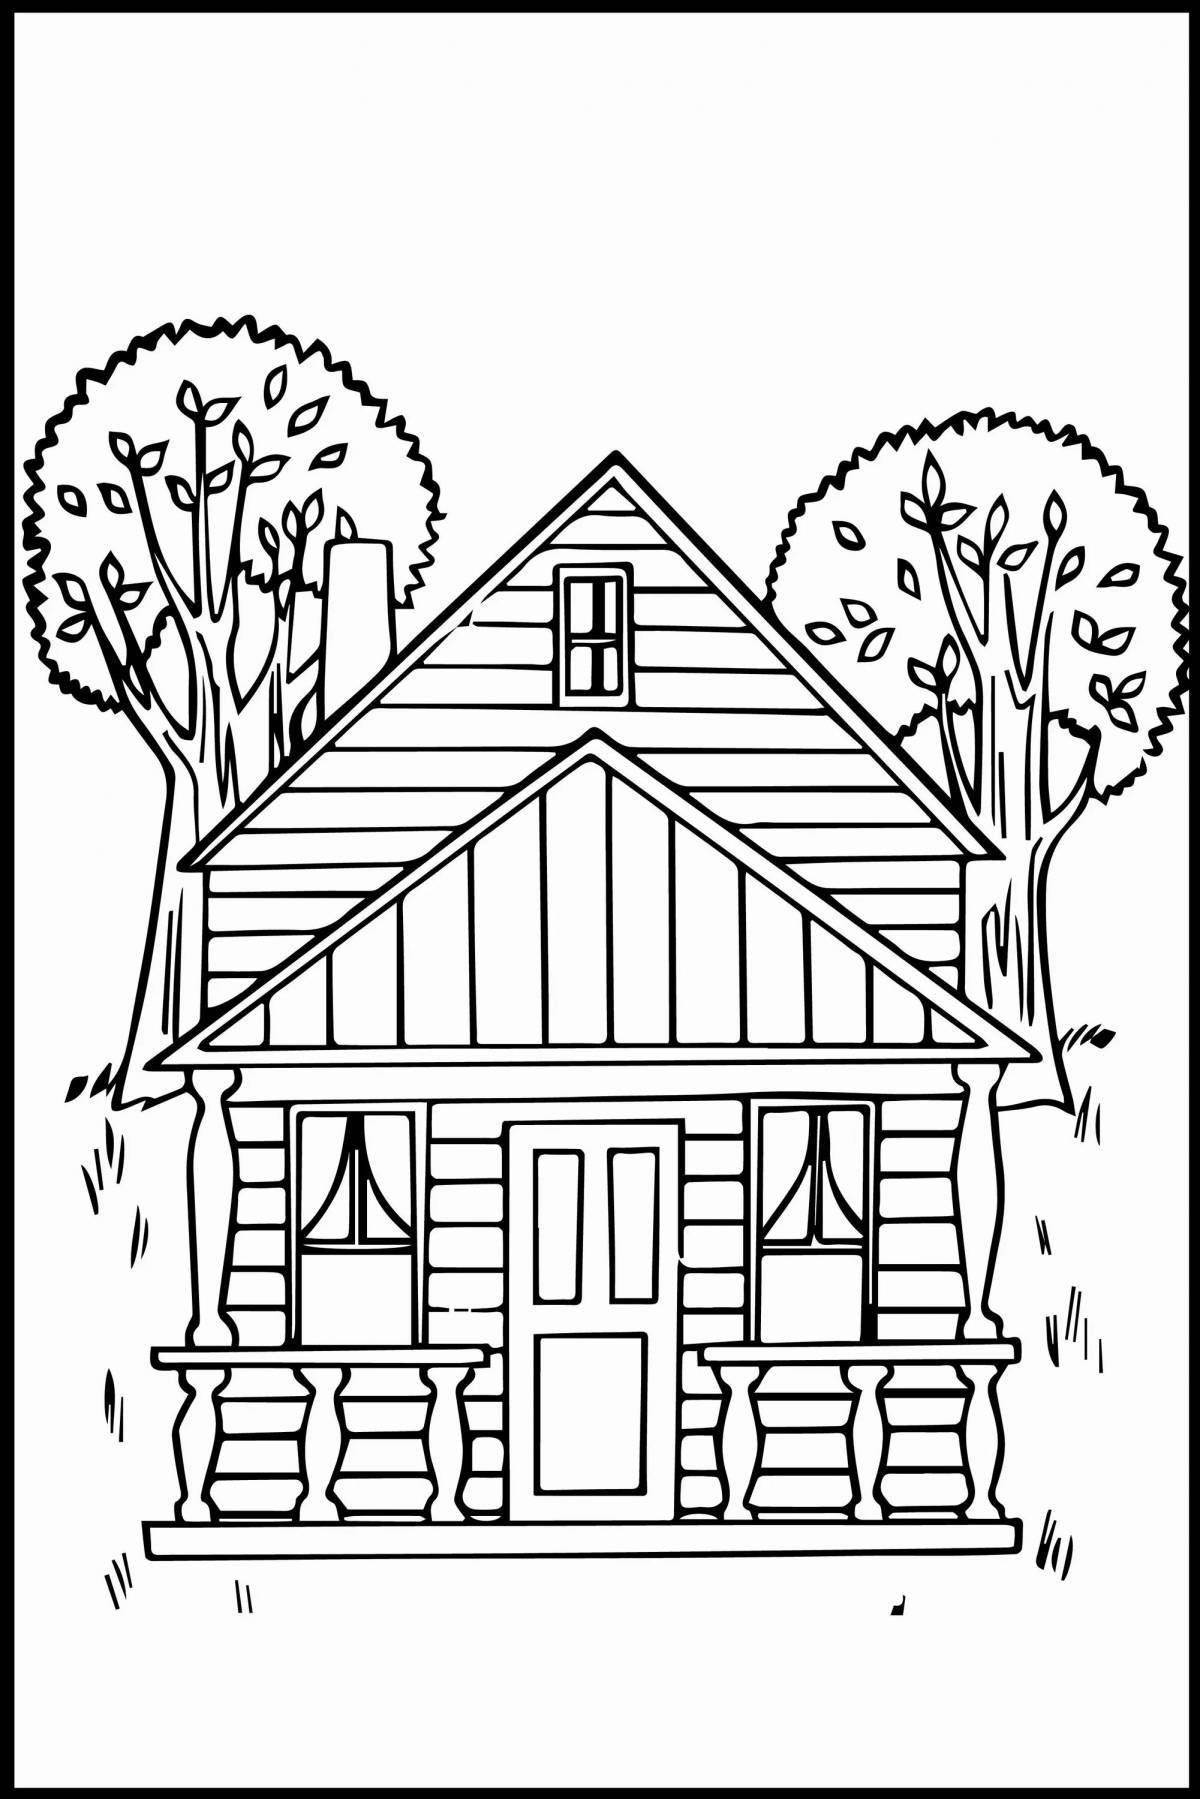 Coloring page inspiring country house